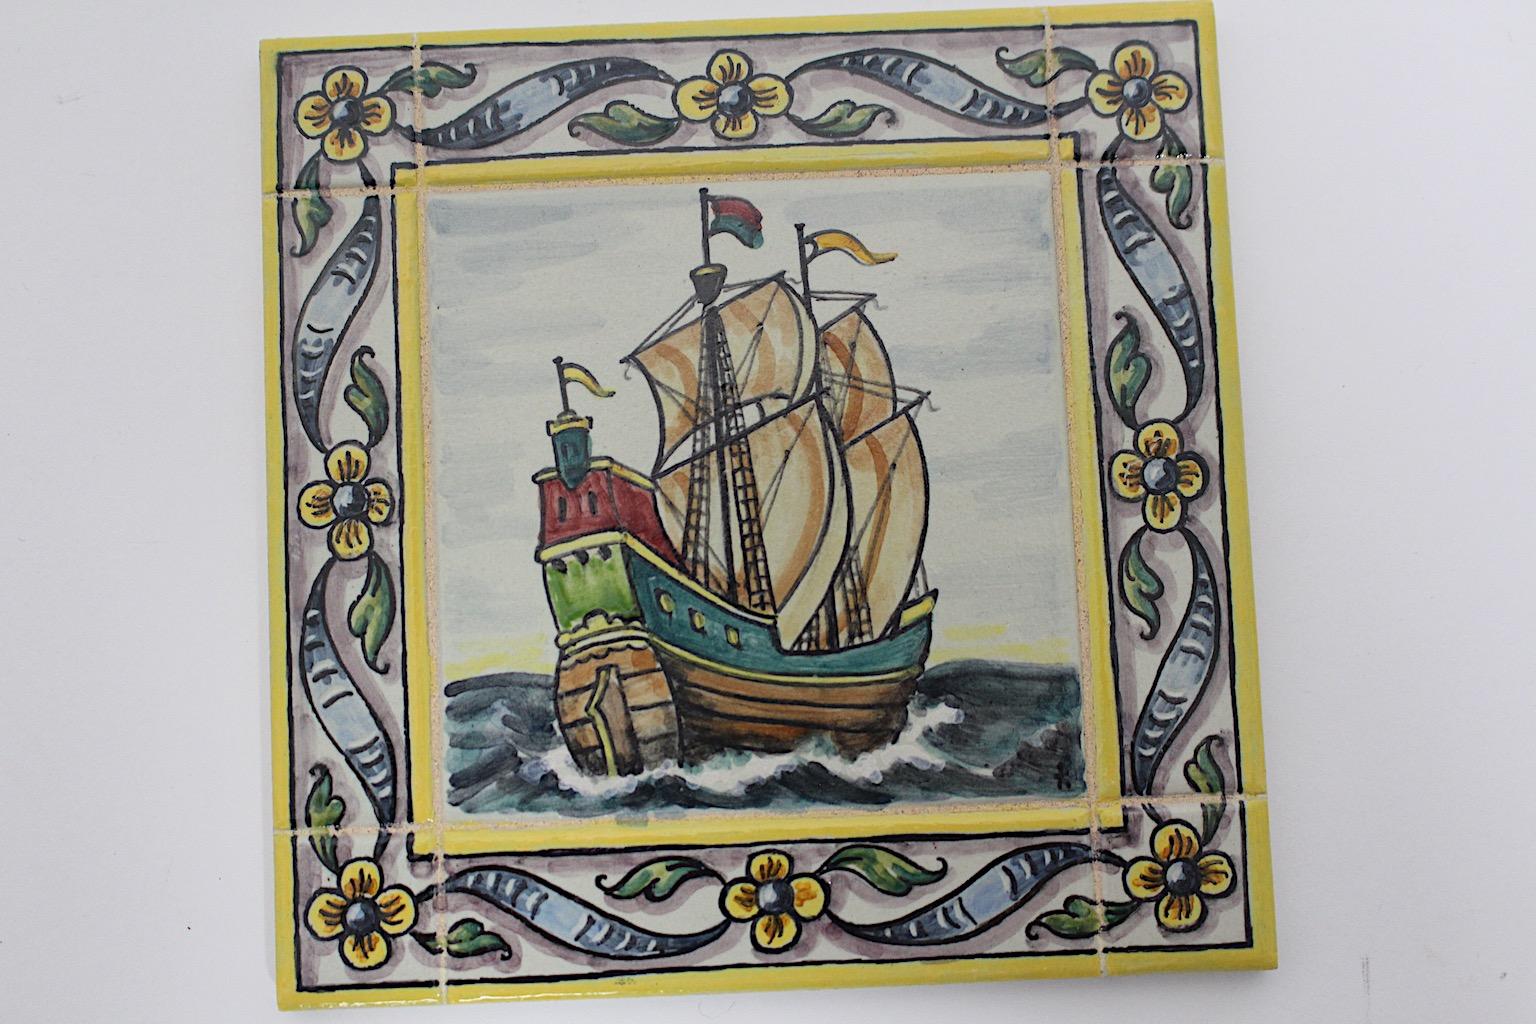 20th Century Mid-Century Modern Vintage Ceramic Tile Multicolored Sail Ship with Flowers 1960 For Sale